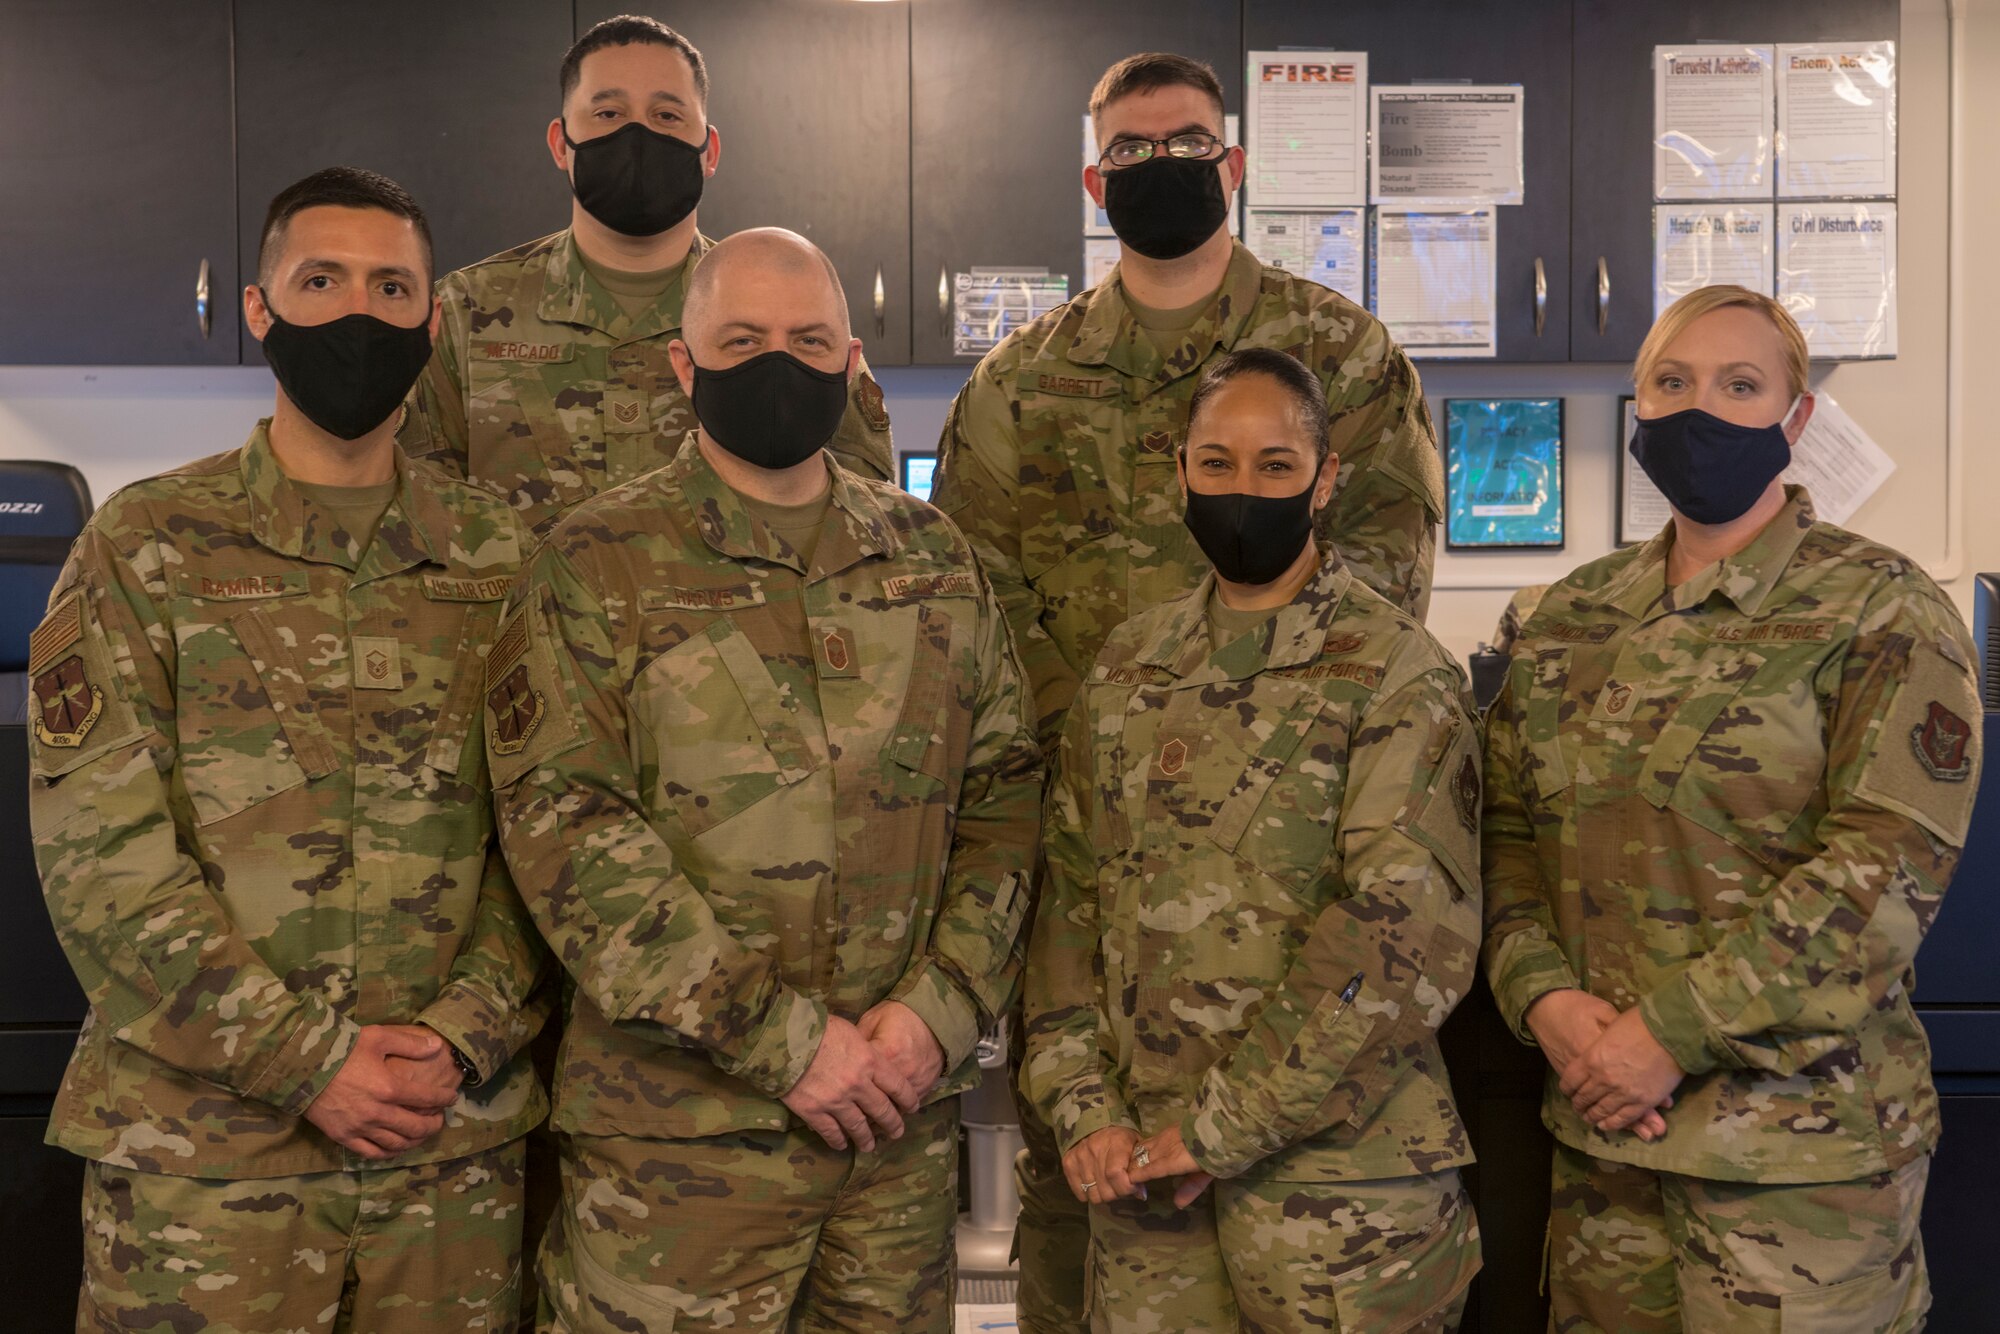 The 403rd Wing Command Post team: (back left to right) Tech. Sgt. Marvin Mercado, Staff Sgt. William Garrett, (front left to right) Master Sgt. Carlos Ramirez, Senior Master Sgt. Brian Harms, Master Sgt. Desirae McIntyre, and Master Sgt. Shawna Smith, pose for a photo at Keesler Air Force Base, Miss., April 11, 2021. The command post manages and performs a multitude of command and control operations that depending on the call they receive, can vary from minor issues to major incidents. (U.S. Air Force photo by 2nd Lt. Christopher Carranza)